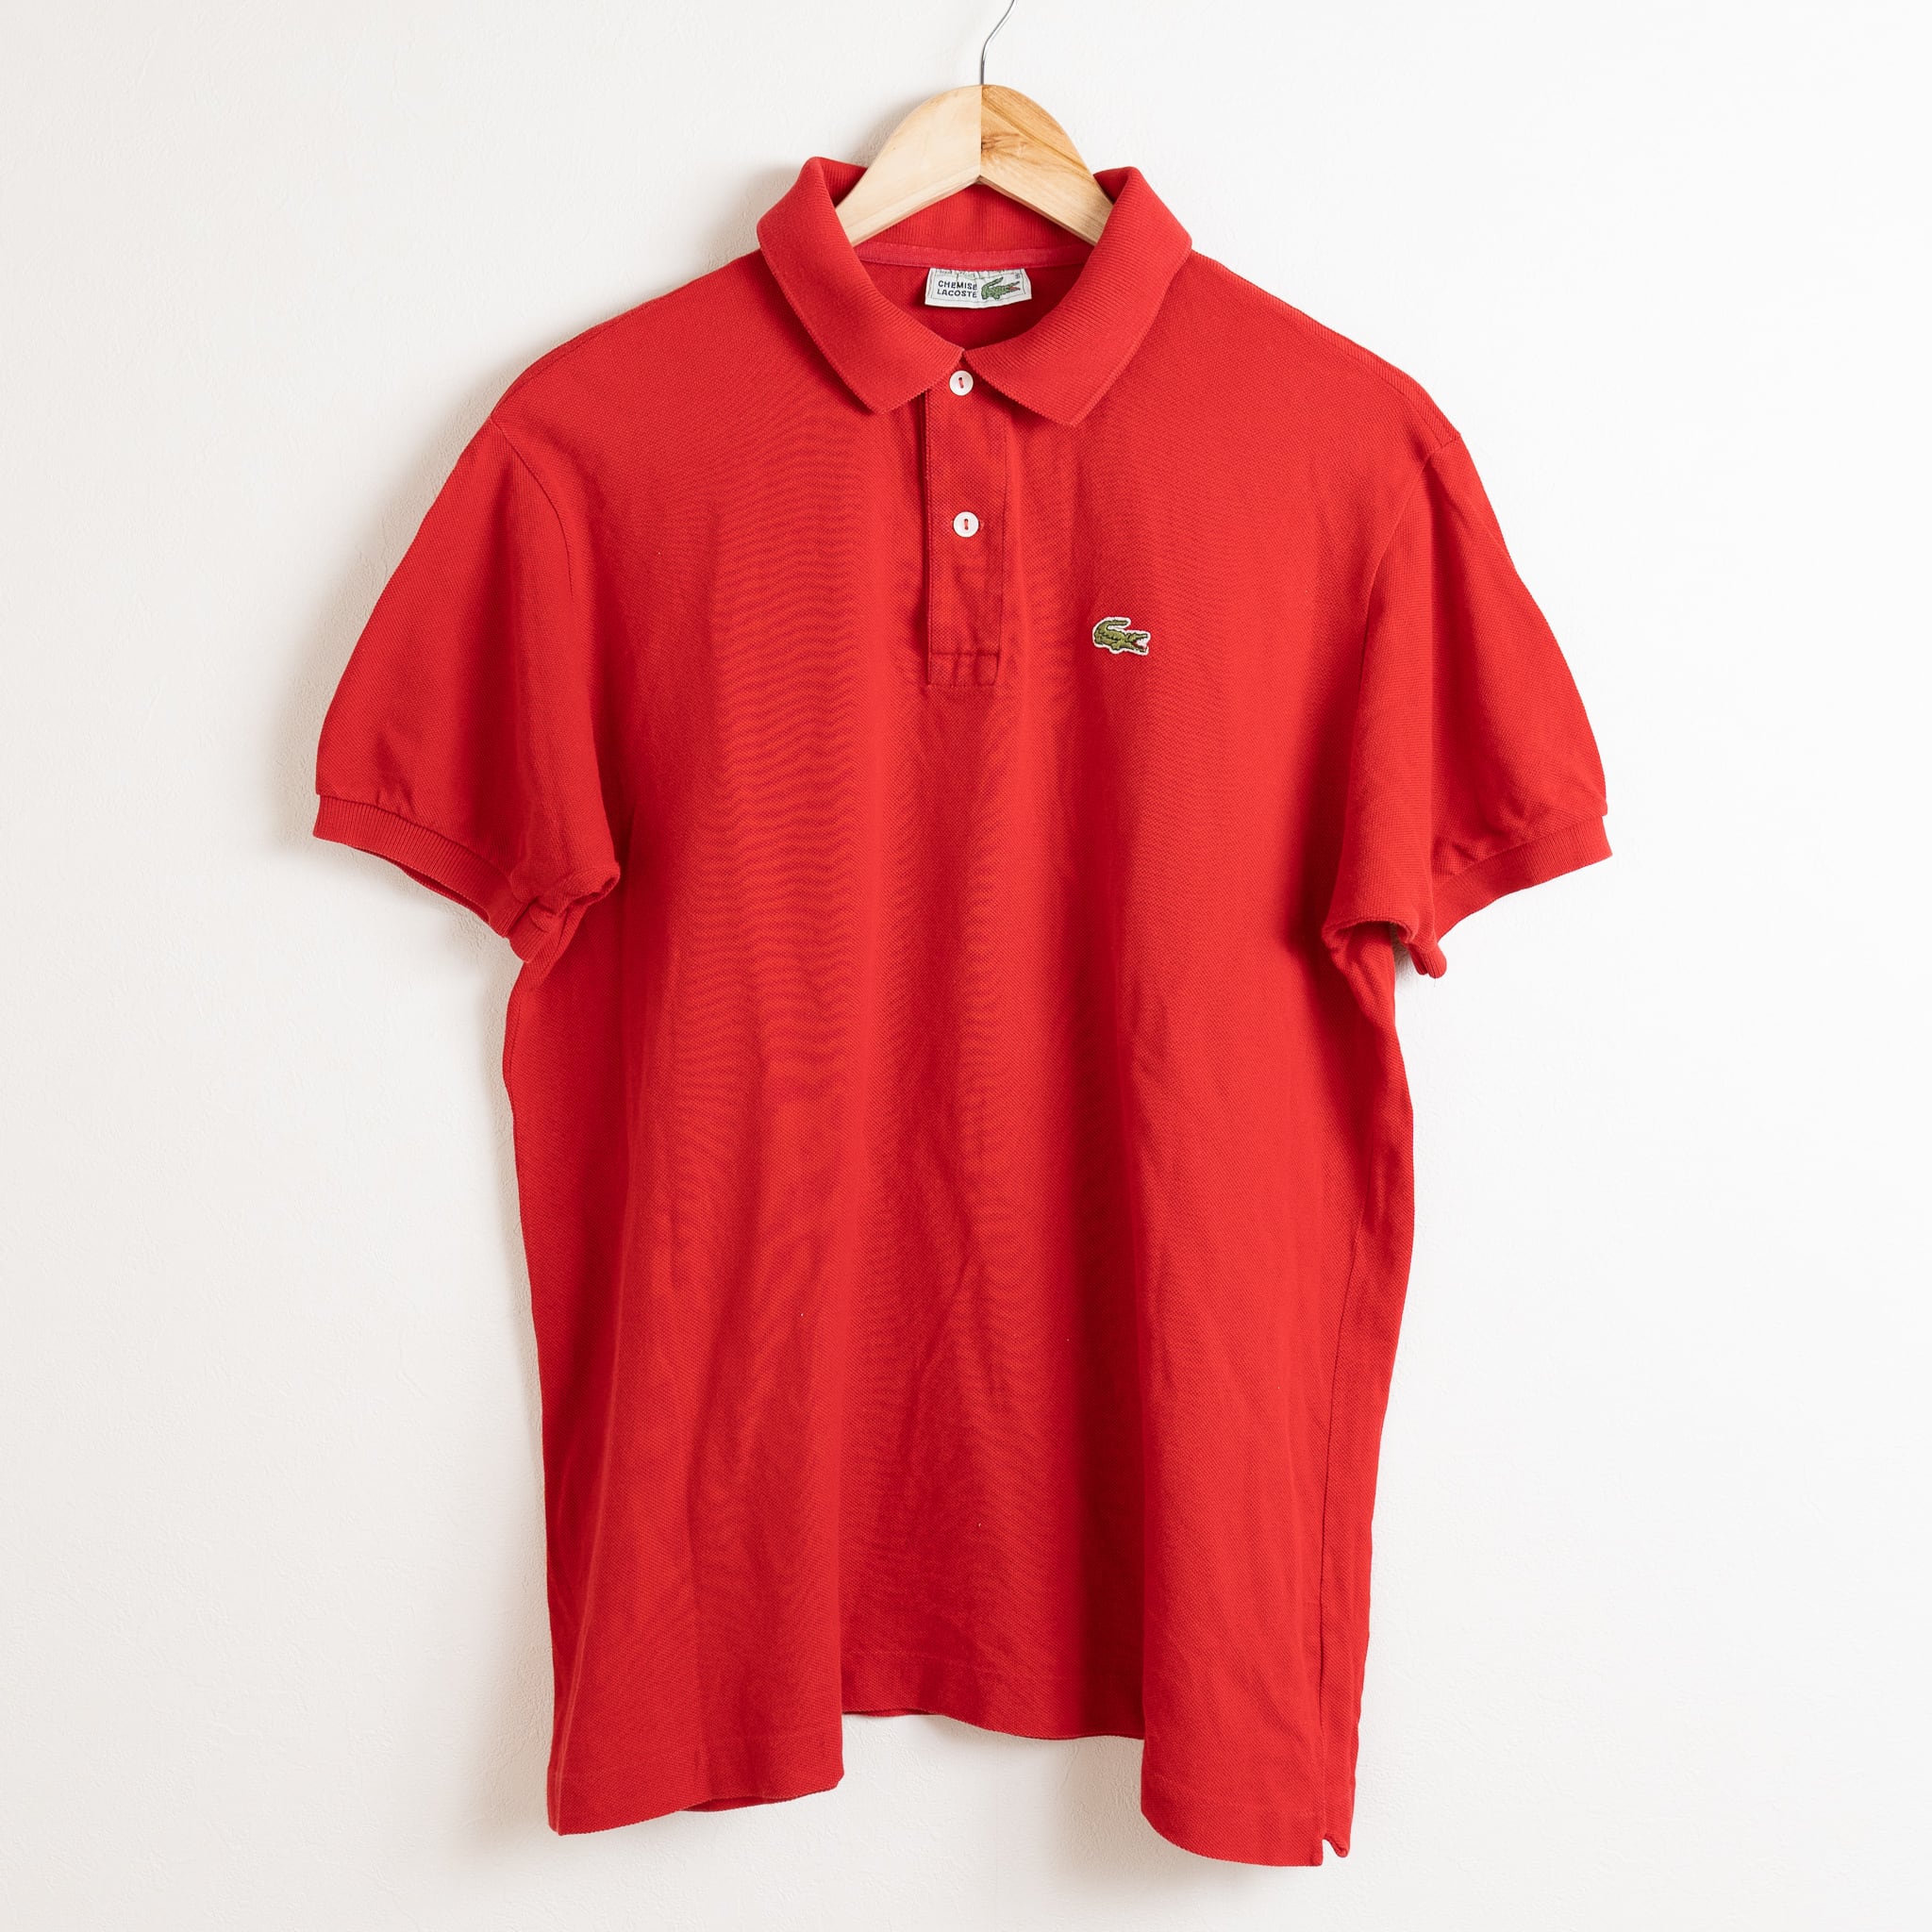 Fysik Røg ros 1970s-80s】CHEMISE LACOSTE Polo Shirts Made in France フレンチラコステ ポロシャツ FL8 |  FAR EAST SIGNAL